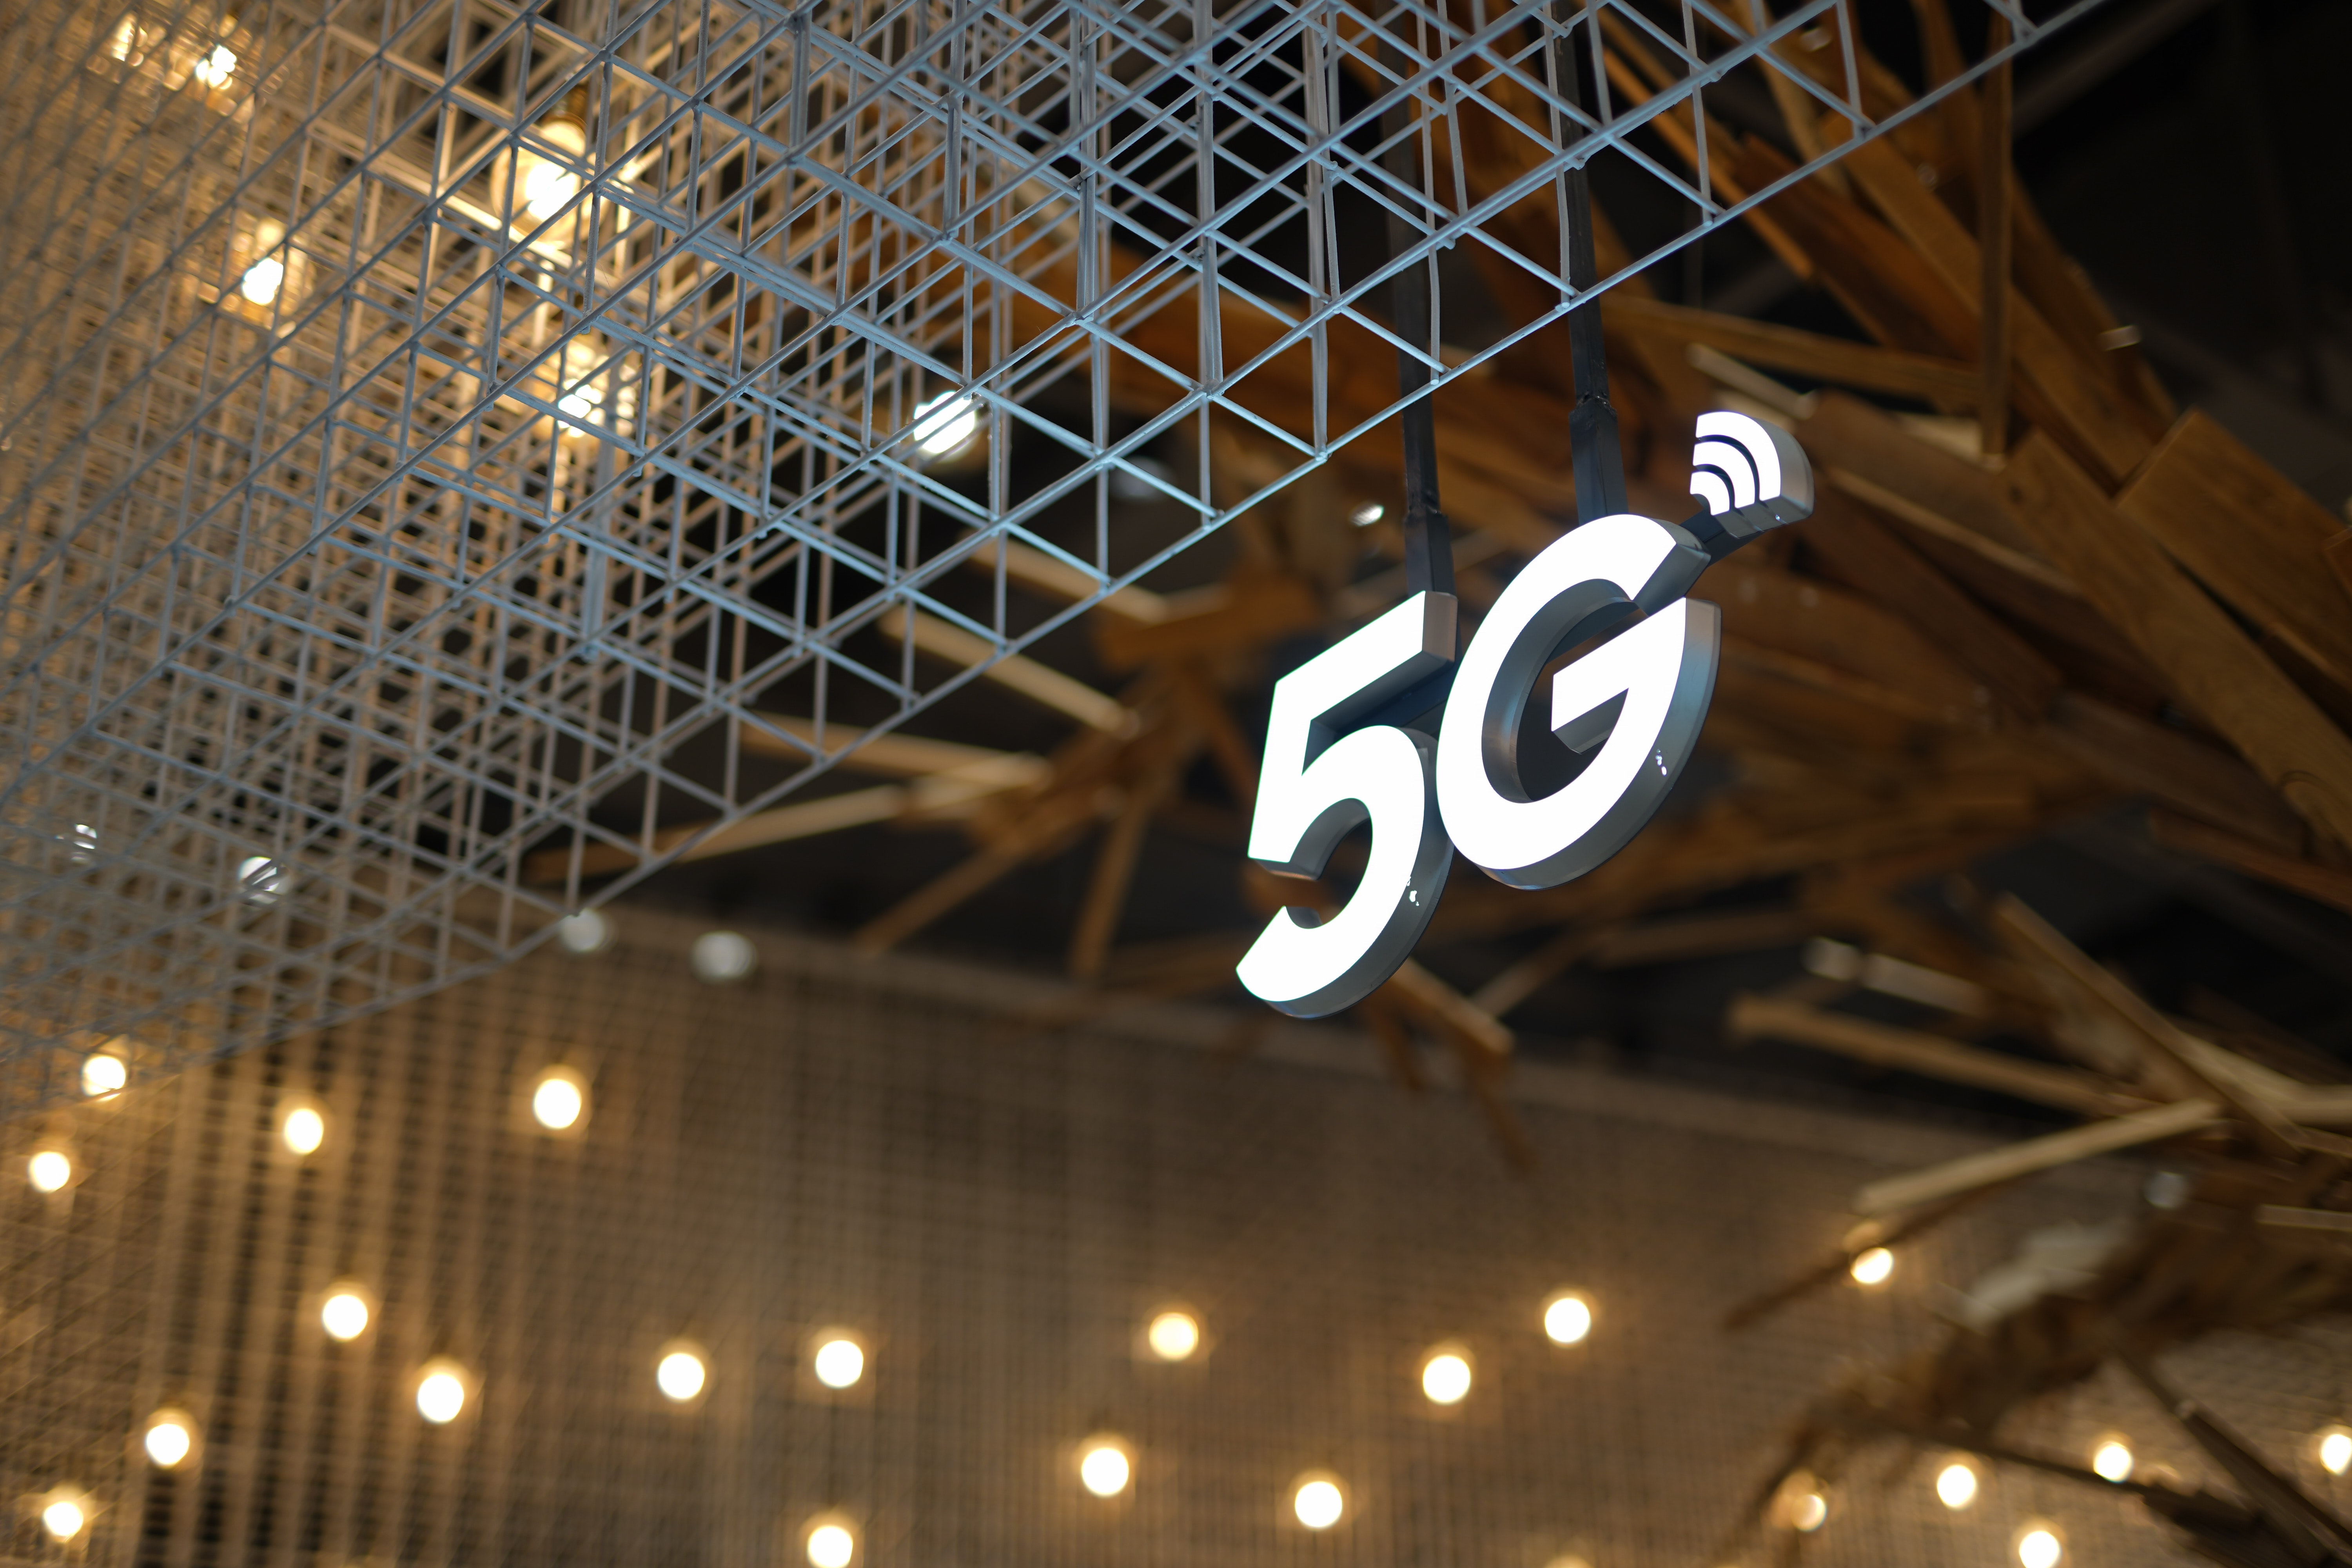 Future of 5G in Russia Remains Uncertain